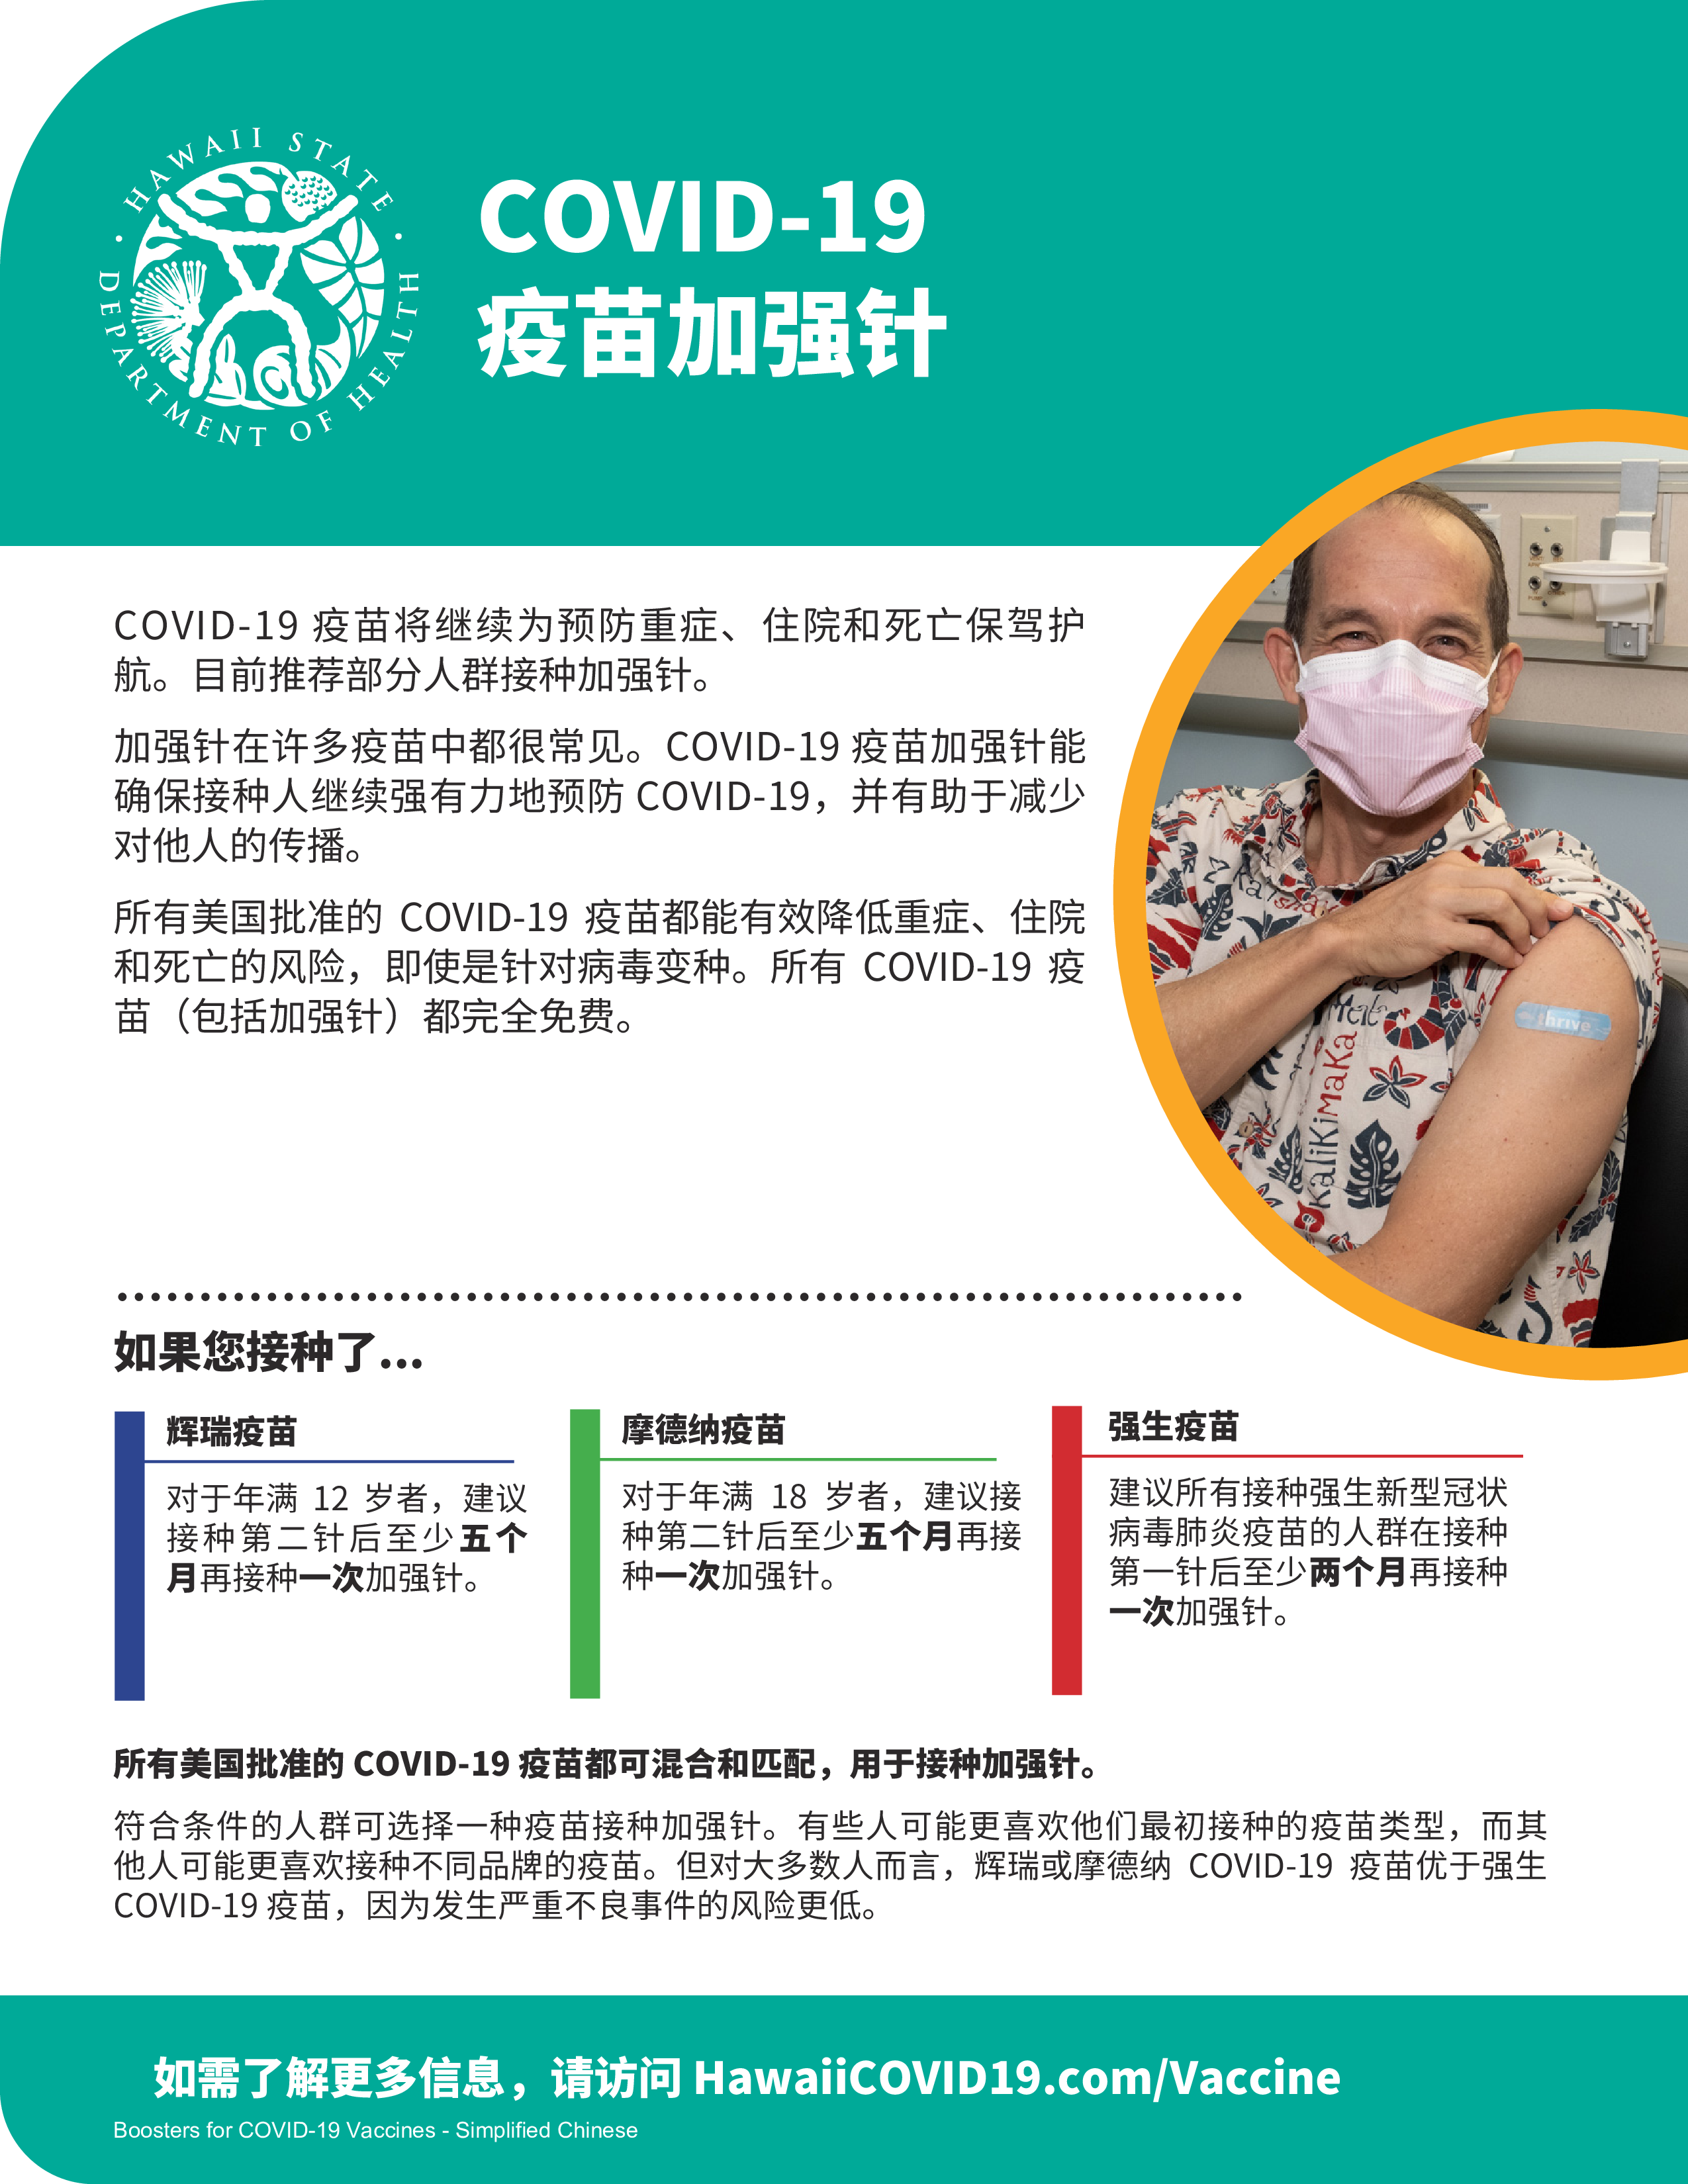 Booster factsheet in Simplified Chinese.